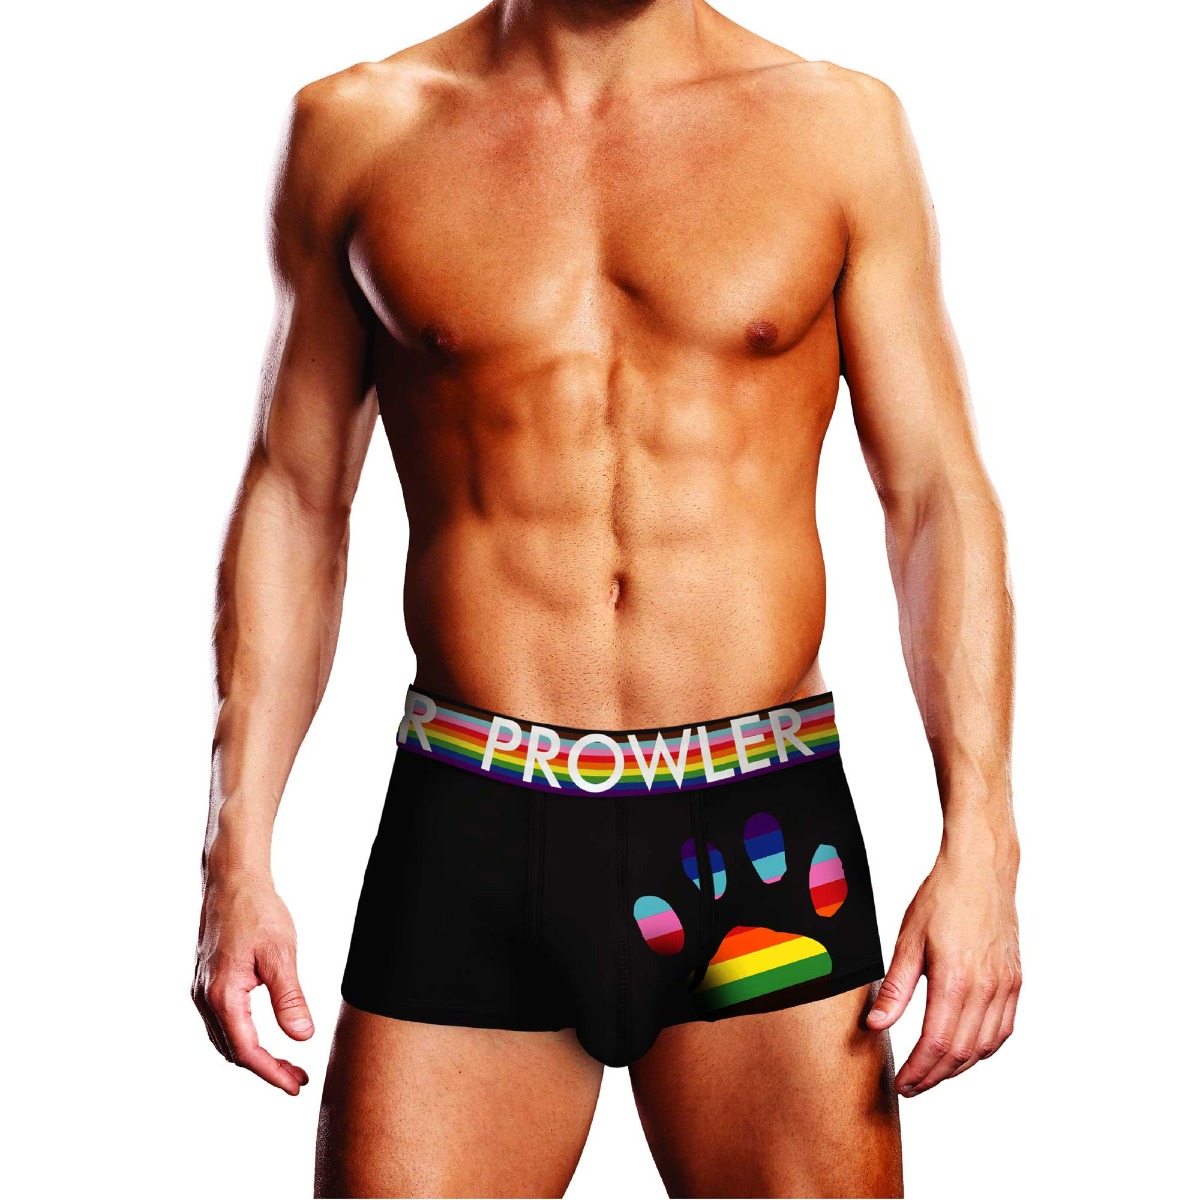 Prowler Black Oversized Paw Trunk Small